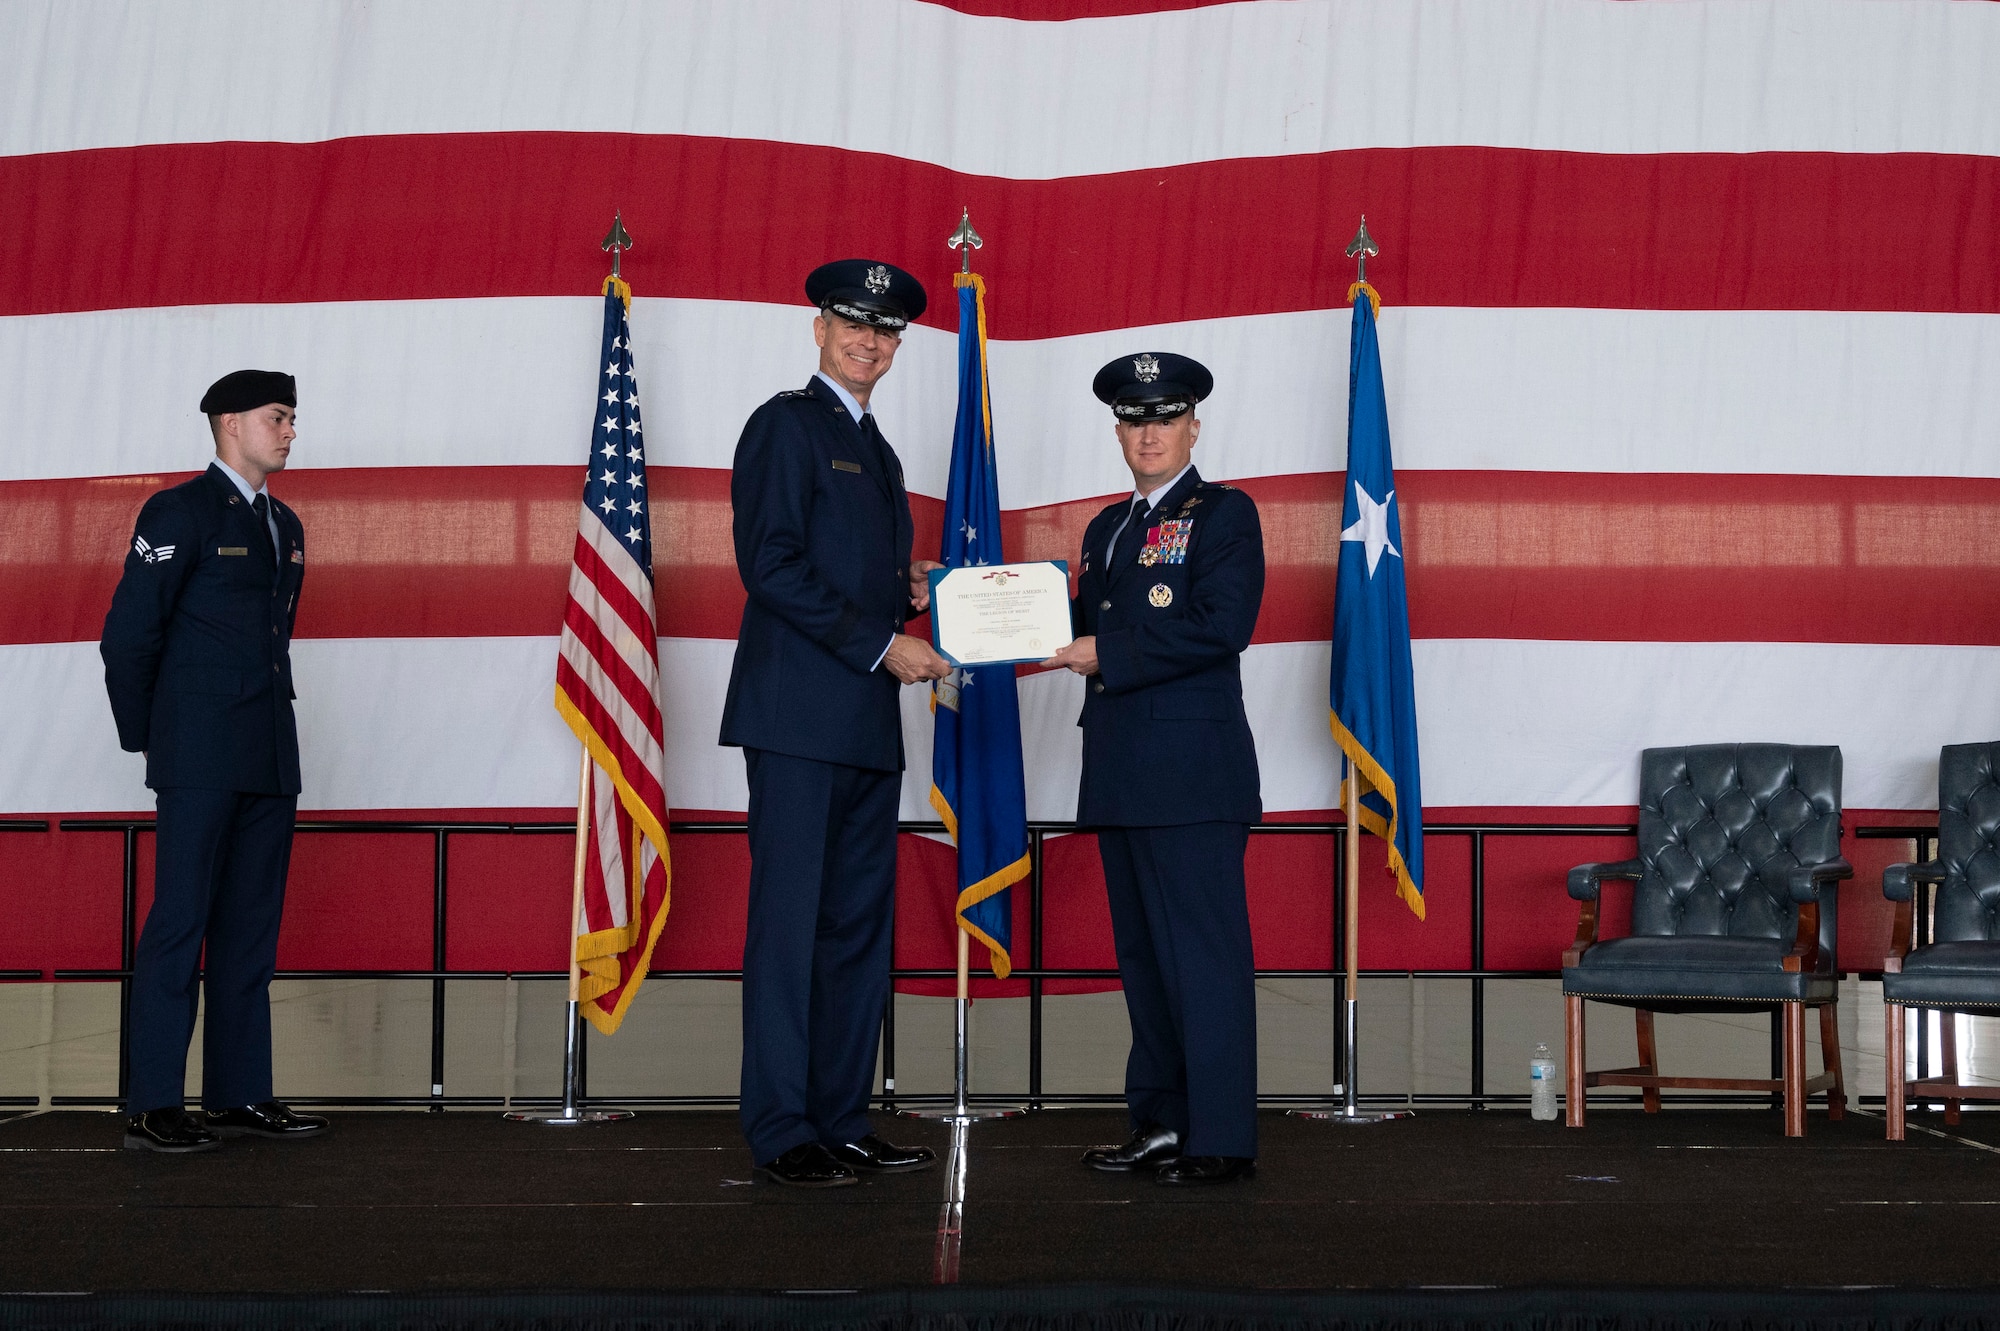 U.S. Air Force Maj. Gen. Craig Wills, 19th Air Force commander, presents an award to Col. Craig Prather, former 47th Flying Training Wing commander, during the 47th Flying Training Wing change of command ceremony at Laughlin Air Force Base, Texas, July 22, 2022. As commander, Davidson will oversee nearly 2,800 military and civilian personnel engaged in executing more than 61,000 aircraft sorties yearly in support of Laughlin’s Specialized Undergraduate Pilot Training mission. (U.S. Air Force photo by Airman 1st Class Kailee Reynolds)